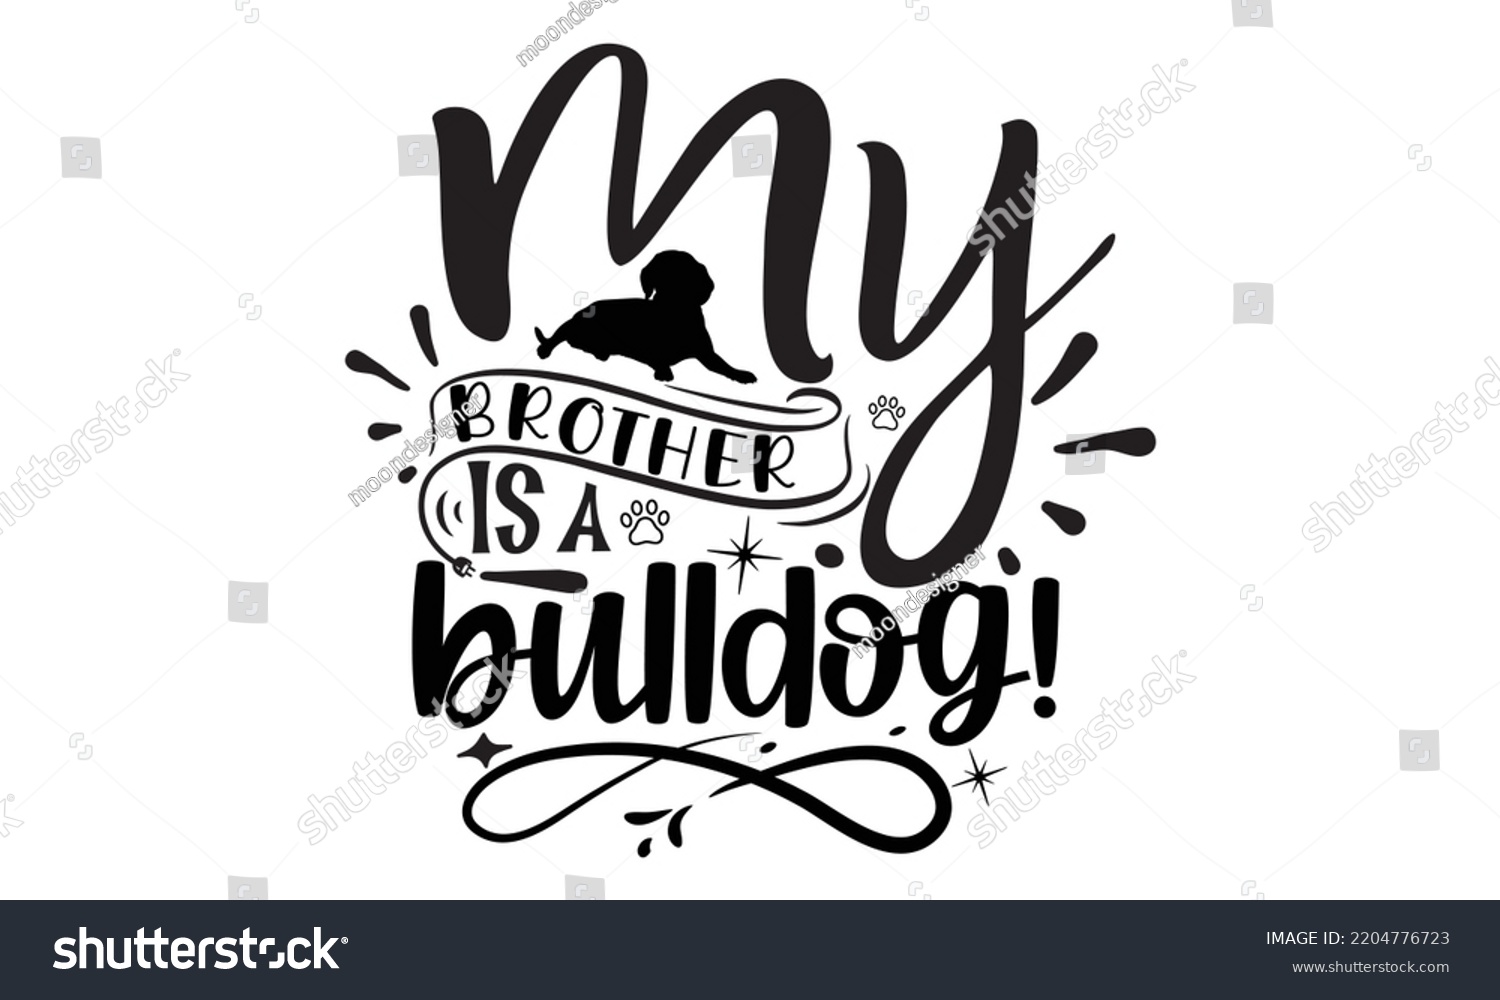 SVG of My brother is a bulldog! - Bullodog T-shirt and SVG Design,  Dog lover t shirt design gift for women, typography design, can you download this Design, svg Files for Cutting and Silhouette EPS, 10 svg